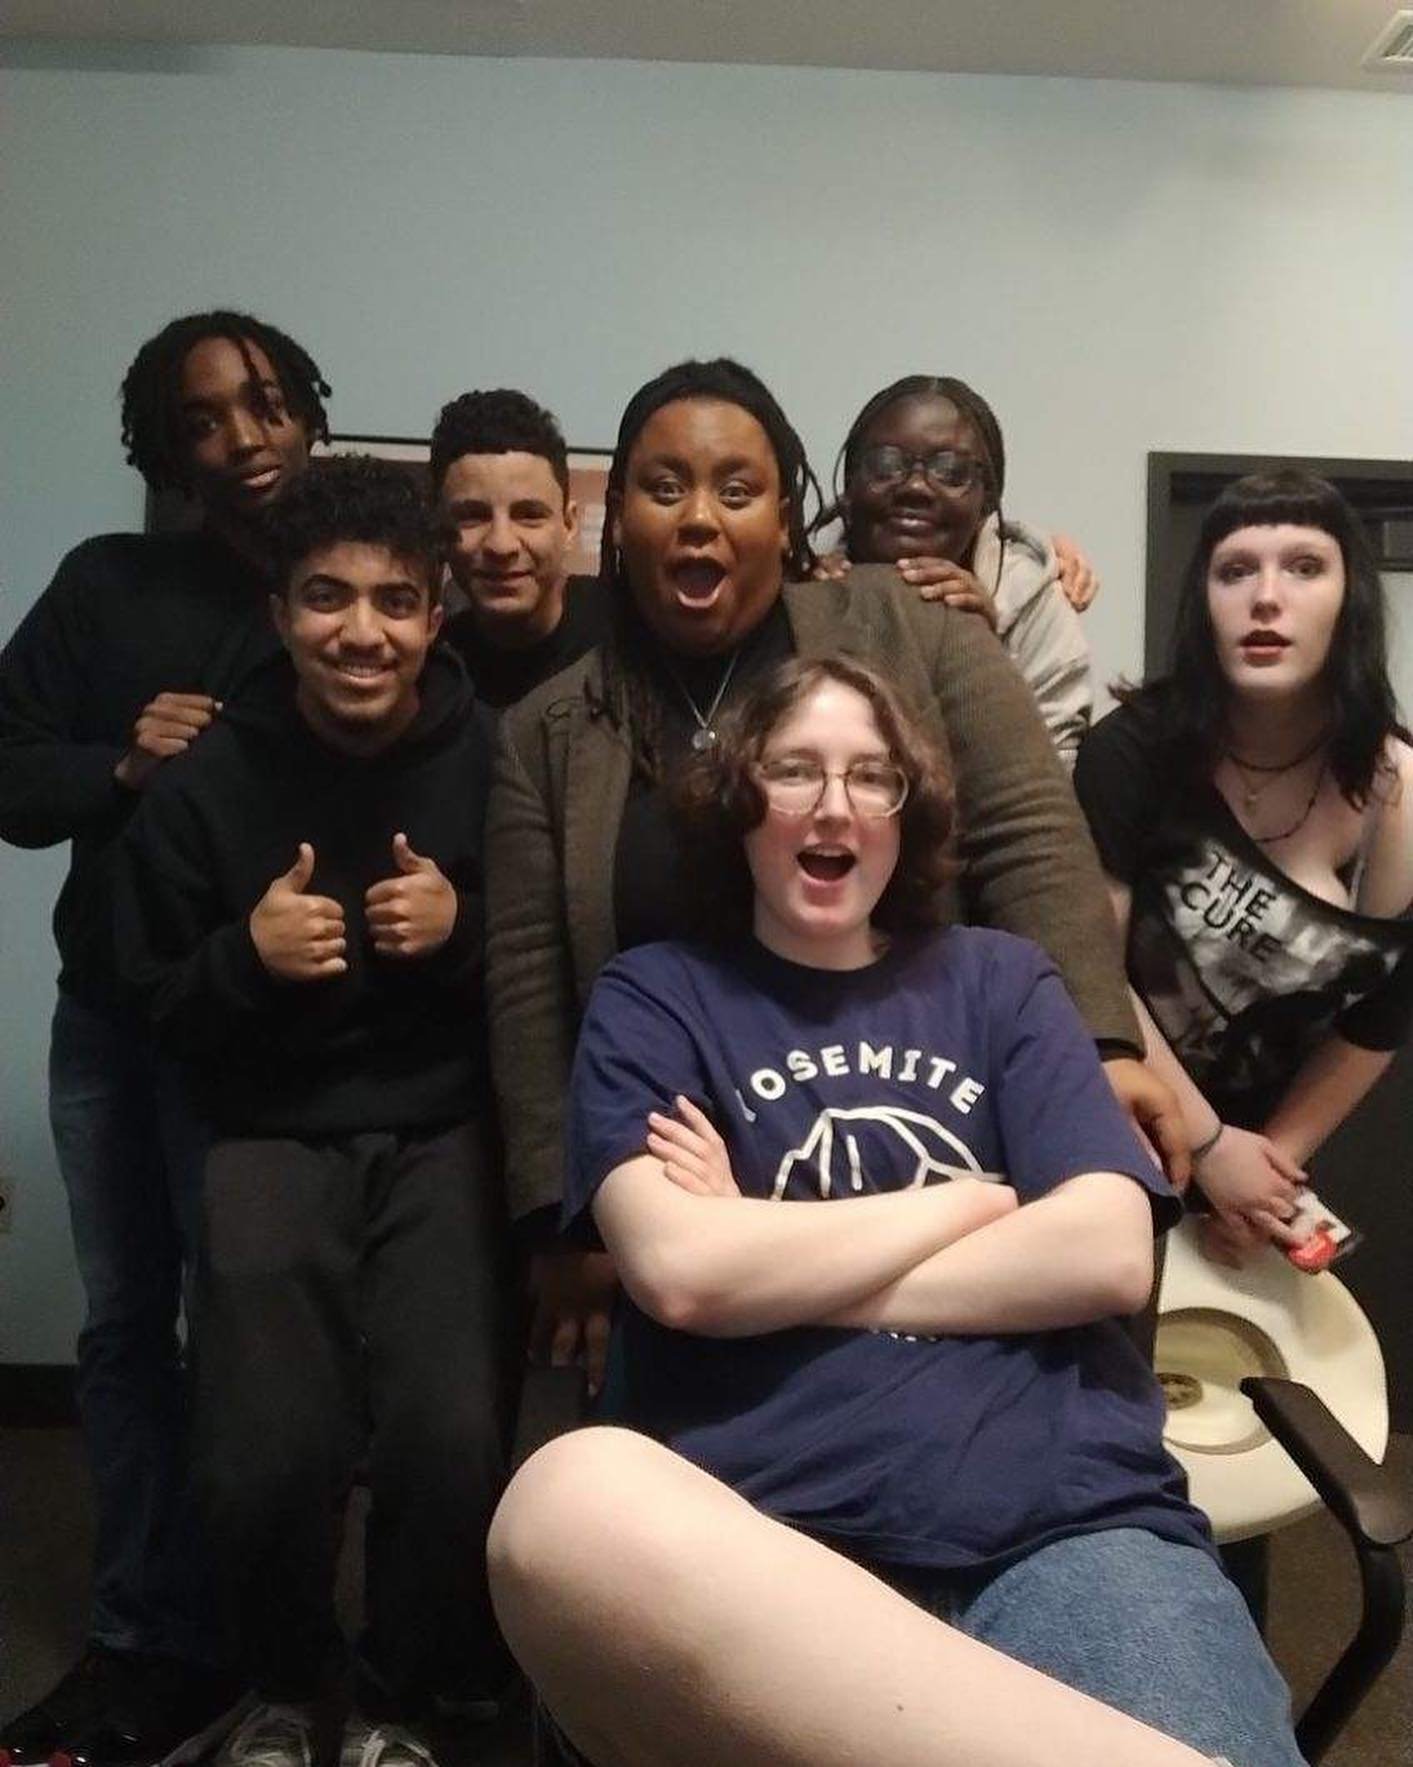 It&rsquo;s been a busy day around here! From @yesand_shadow performing improv on @phl17 with @theatrephiladelphia, to a @mt_airy_day promo video with @harleyjproductions, we&rsquo;re having fun sharing about Yes! And&hellip; today! 

#yesand #sharing